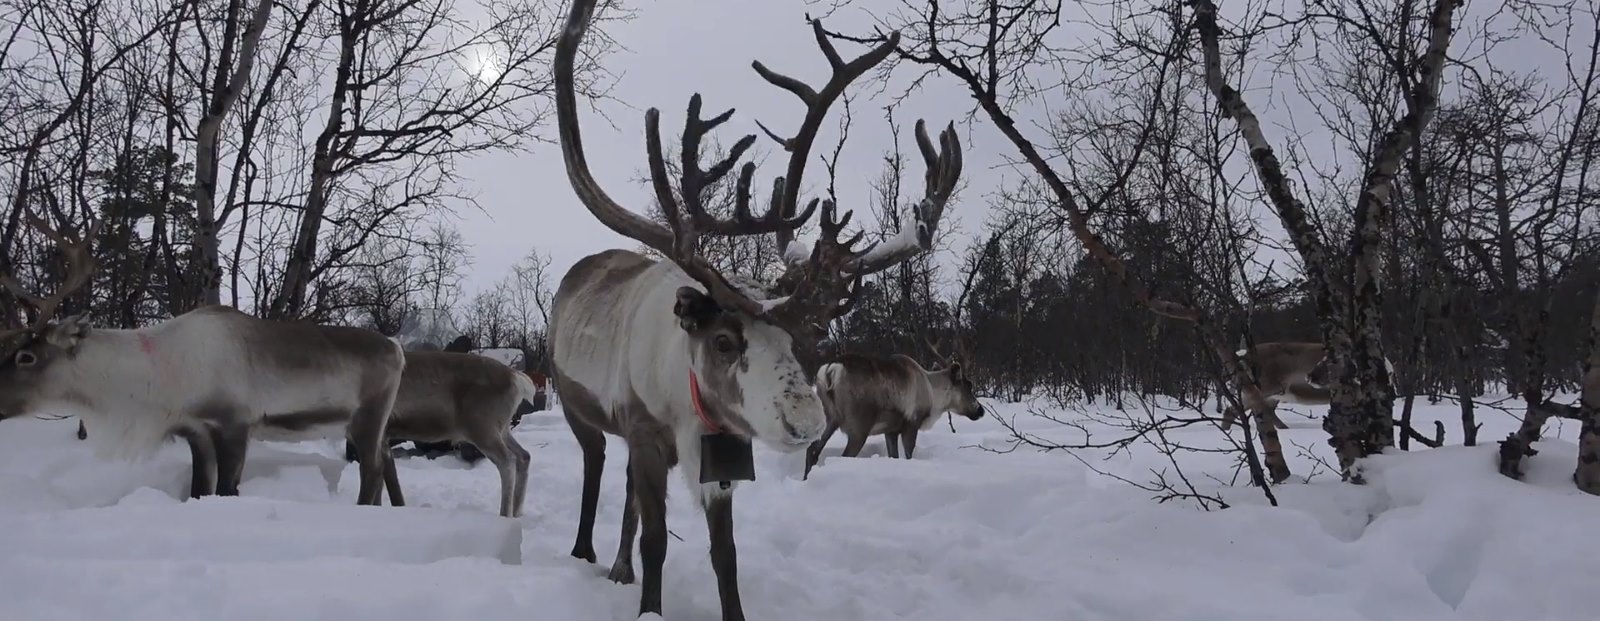 Video: My Day With a Sami Reindeer Herder